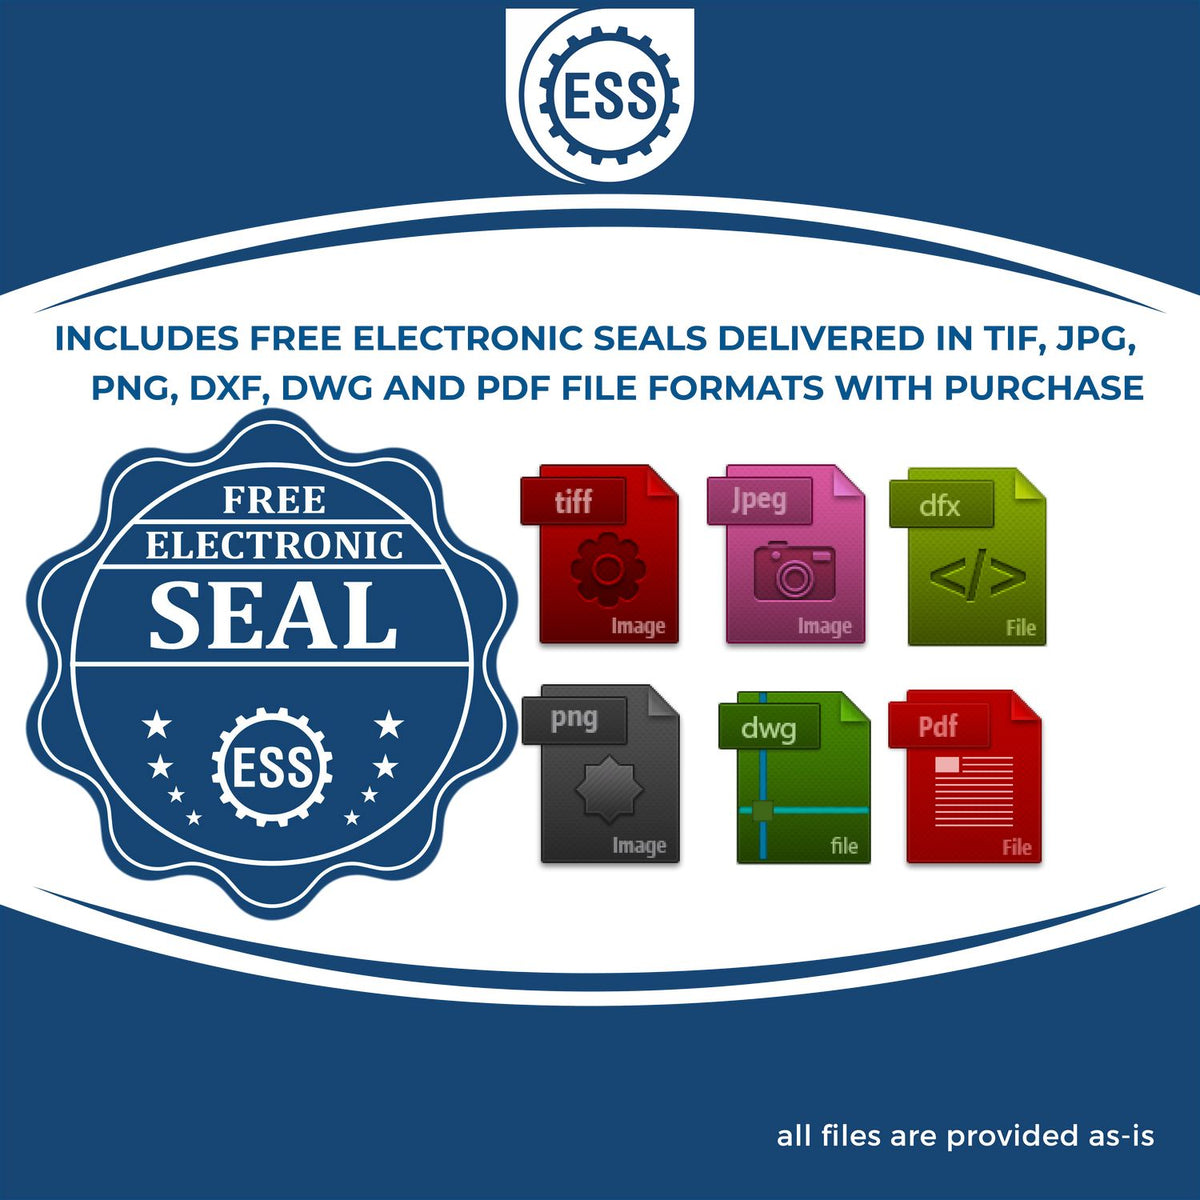 An infographic for the free electronic seal for the Premium MaxLight Pre-Inked Pennsylvania Landscape Architectural Stamp illustrating the different file type icons such as DXF, DWG, TIF, JPG and PNG.